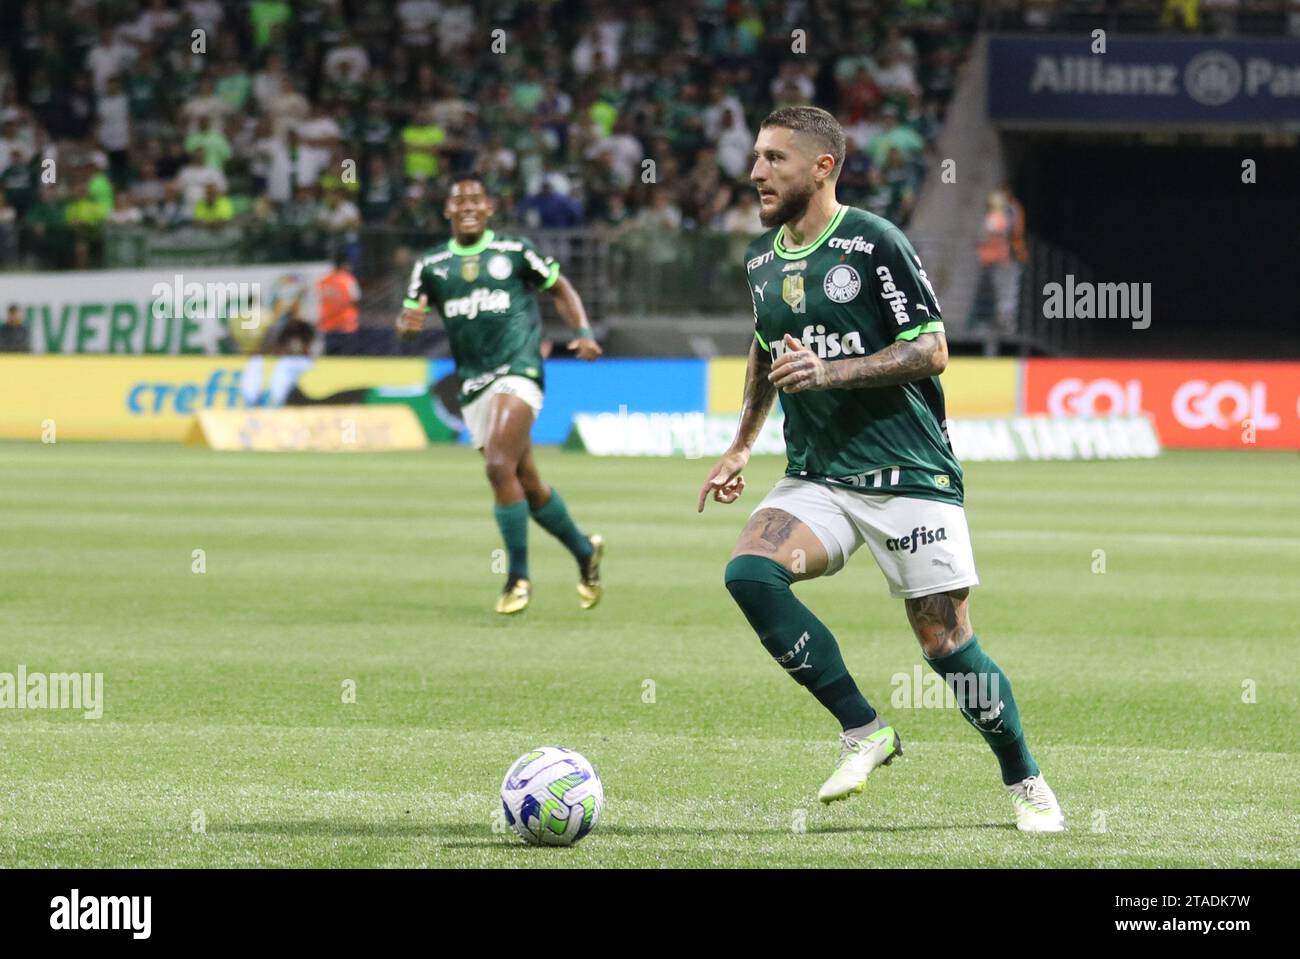 Ze Rafael of Palmeiras during the match against América-MG in the 36th round of the Brazilian Championship, at Allianz Parque, west of São Paulo, this Wednesday, the 29th. Credit: Brazil Photo Press/Alamy Live News Stock Photo